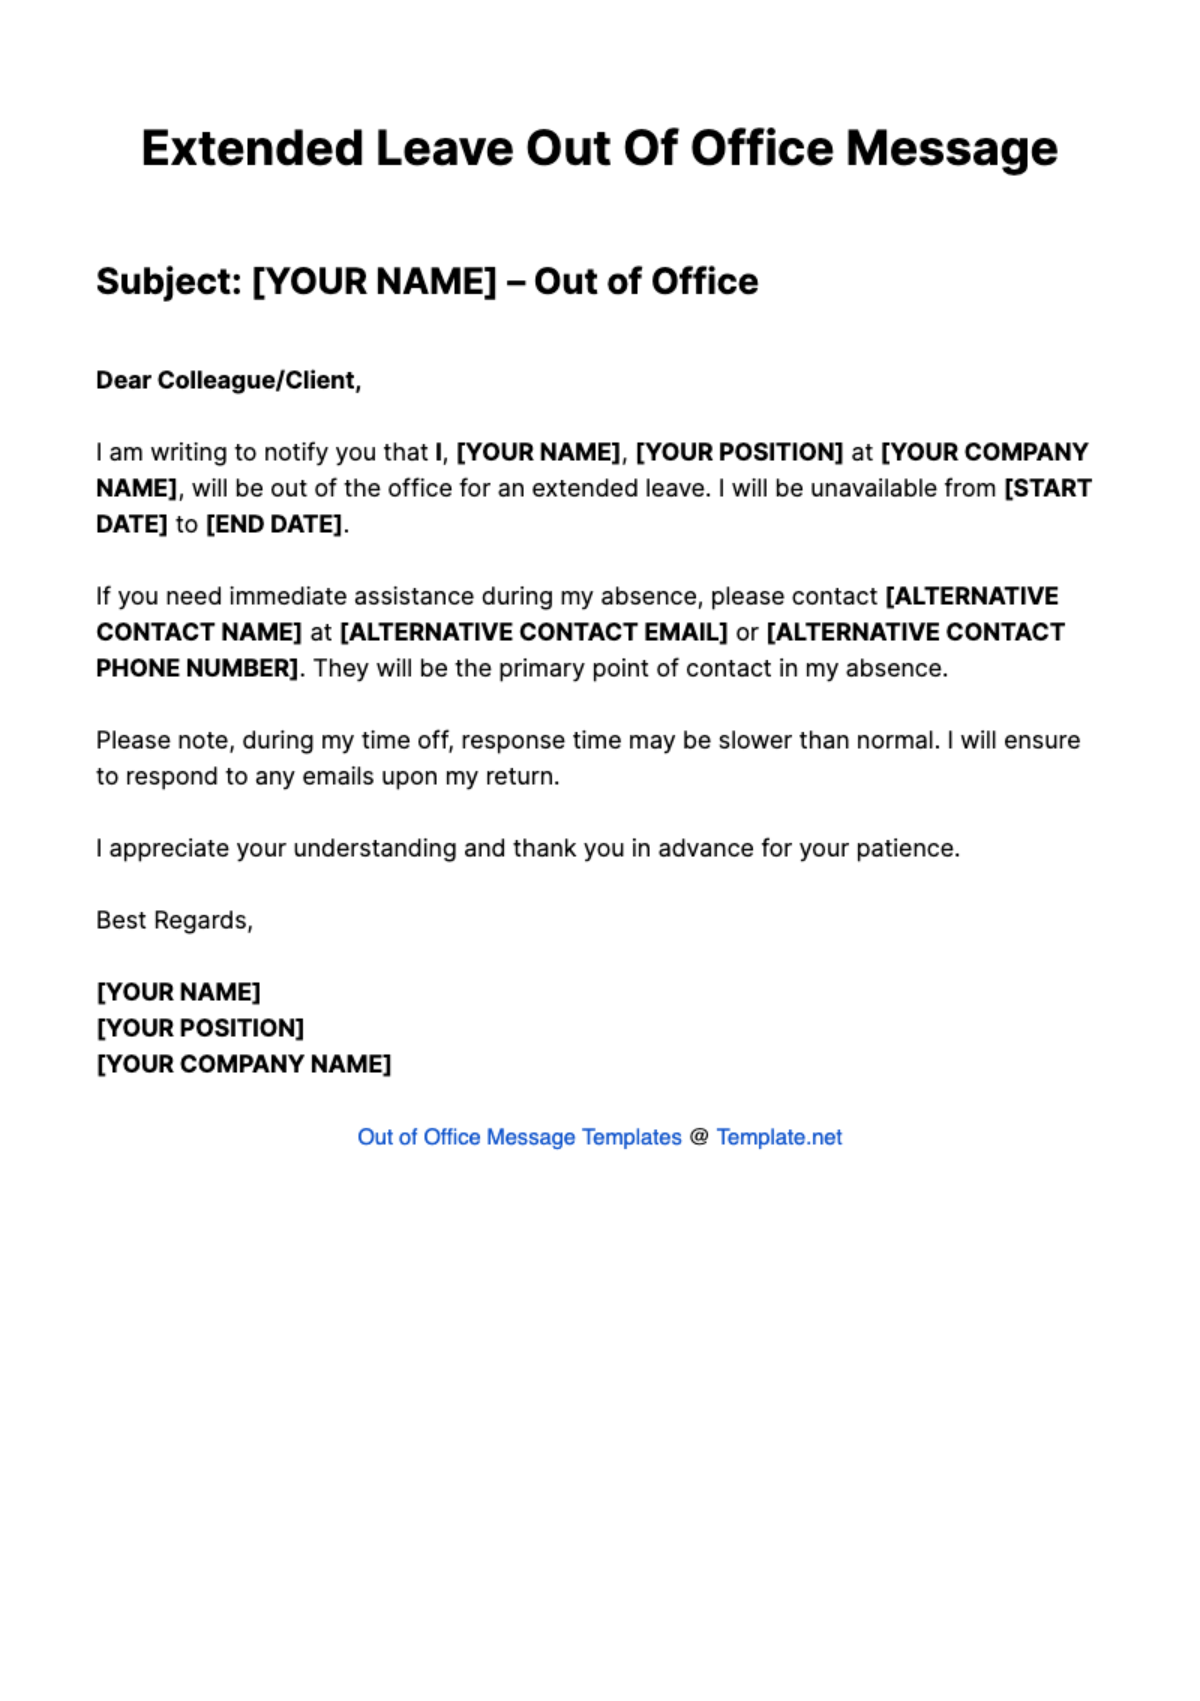 Extended Leave Out Of Office Message Template